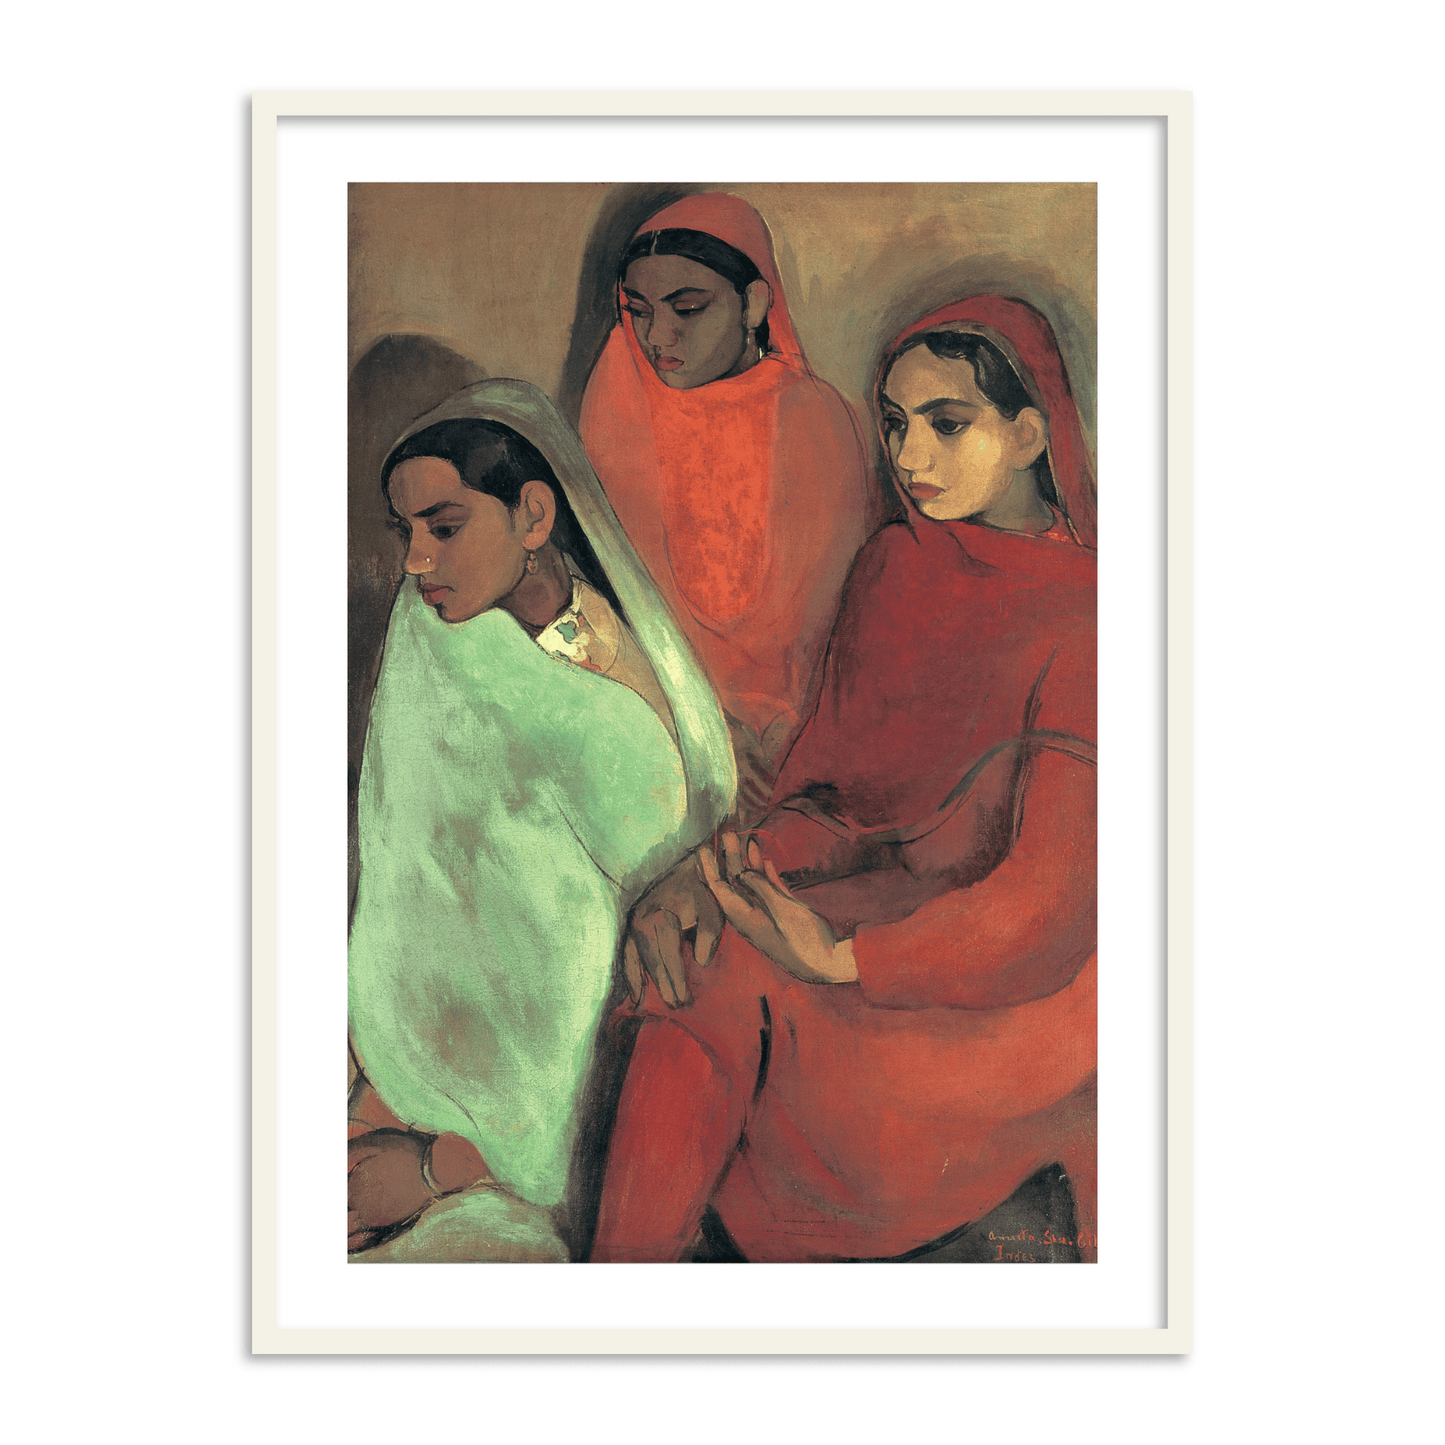 Group of Three Girls Famous Wall Painting by Amrita Sher Gil